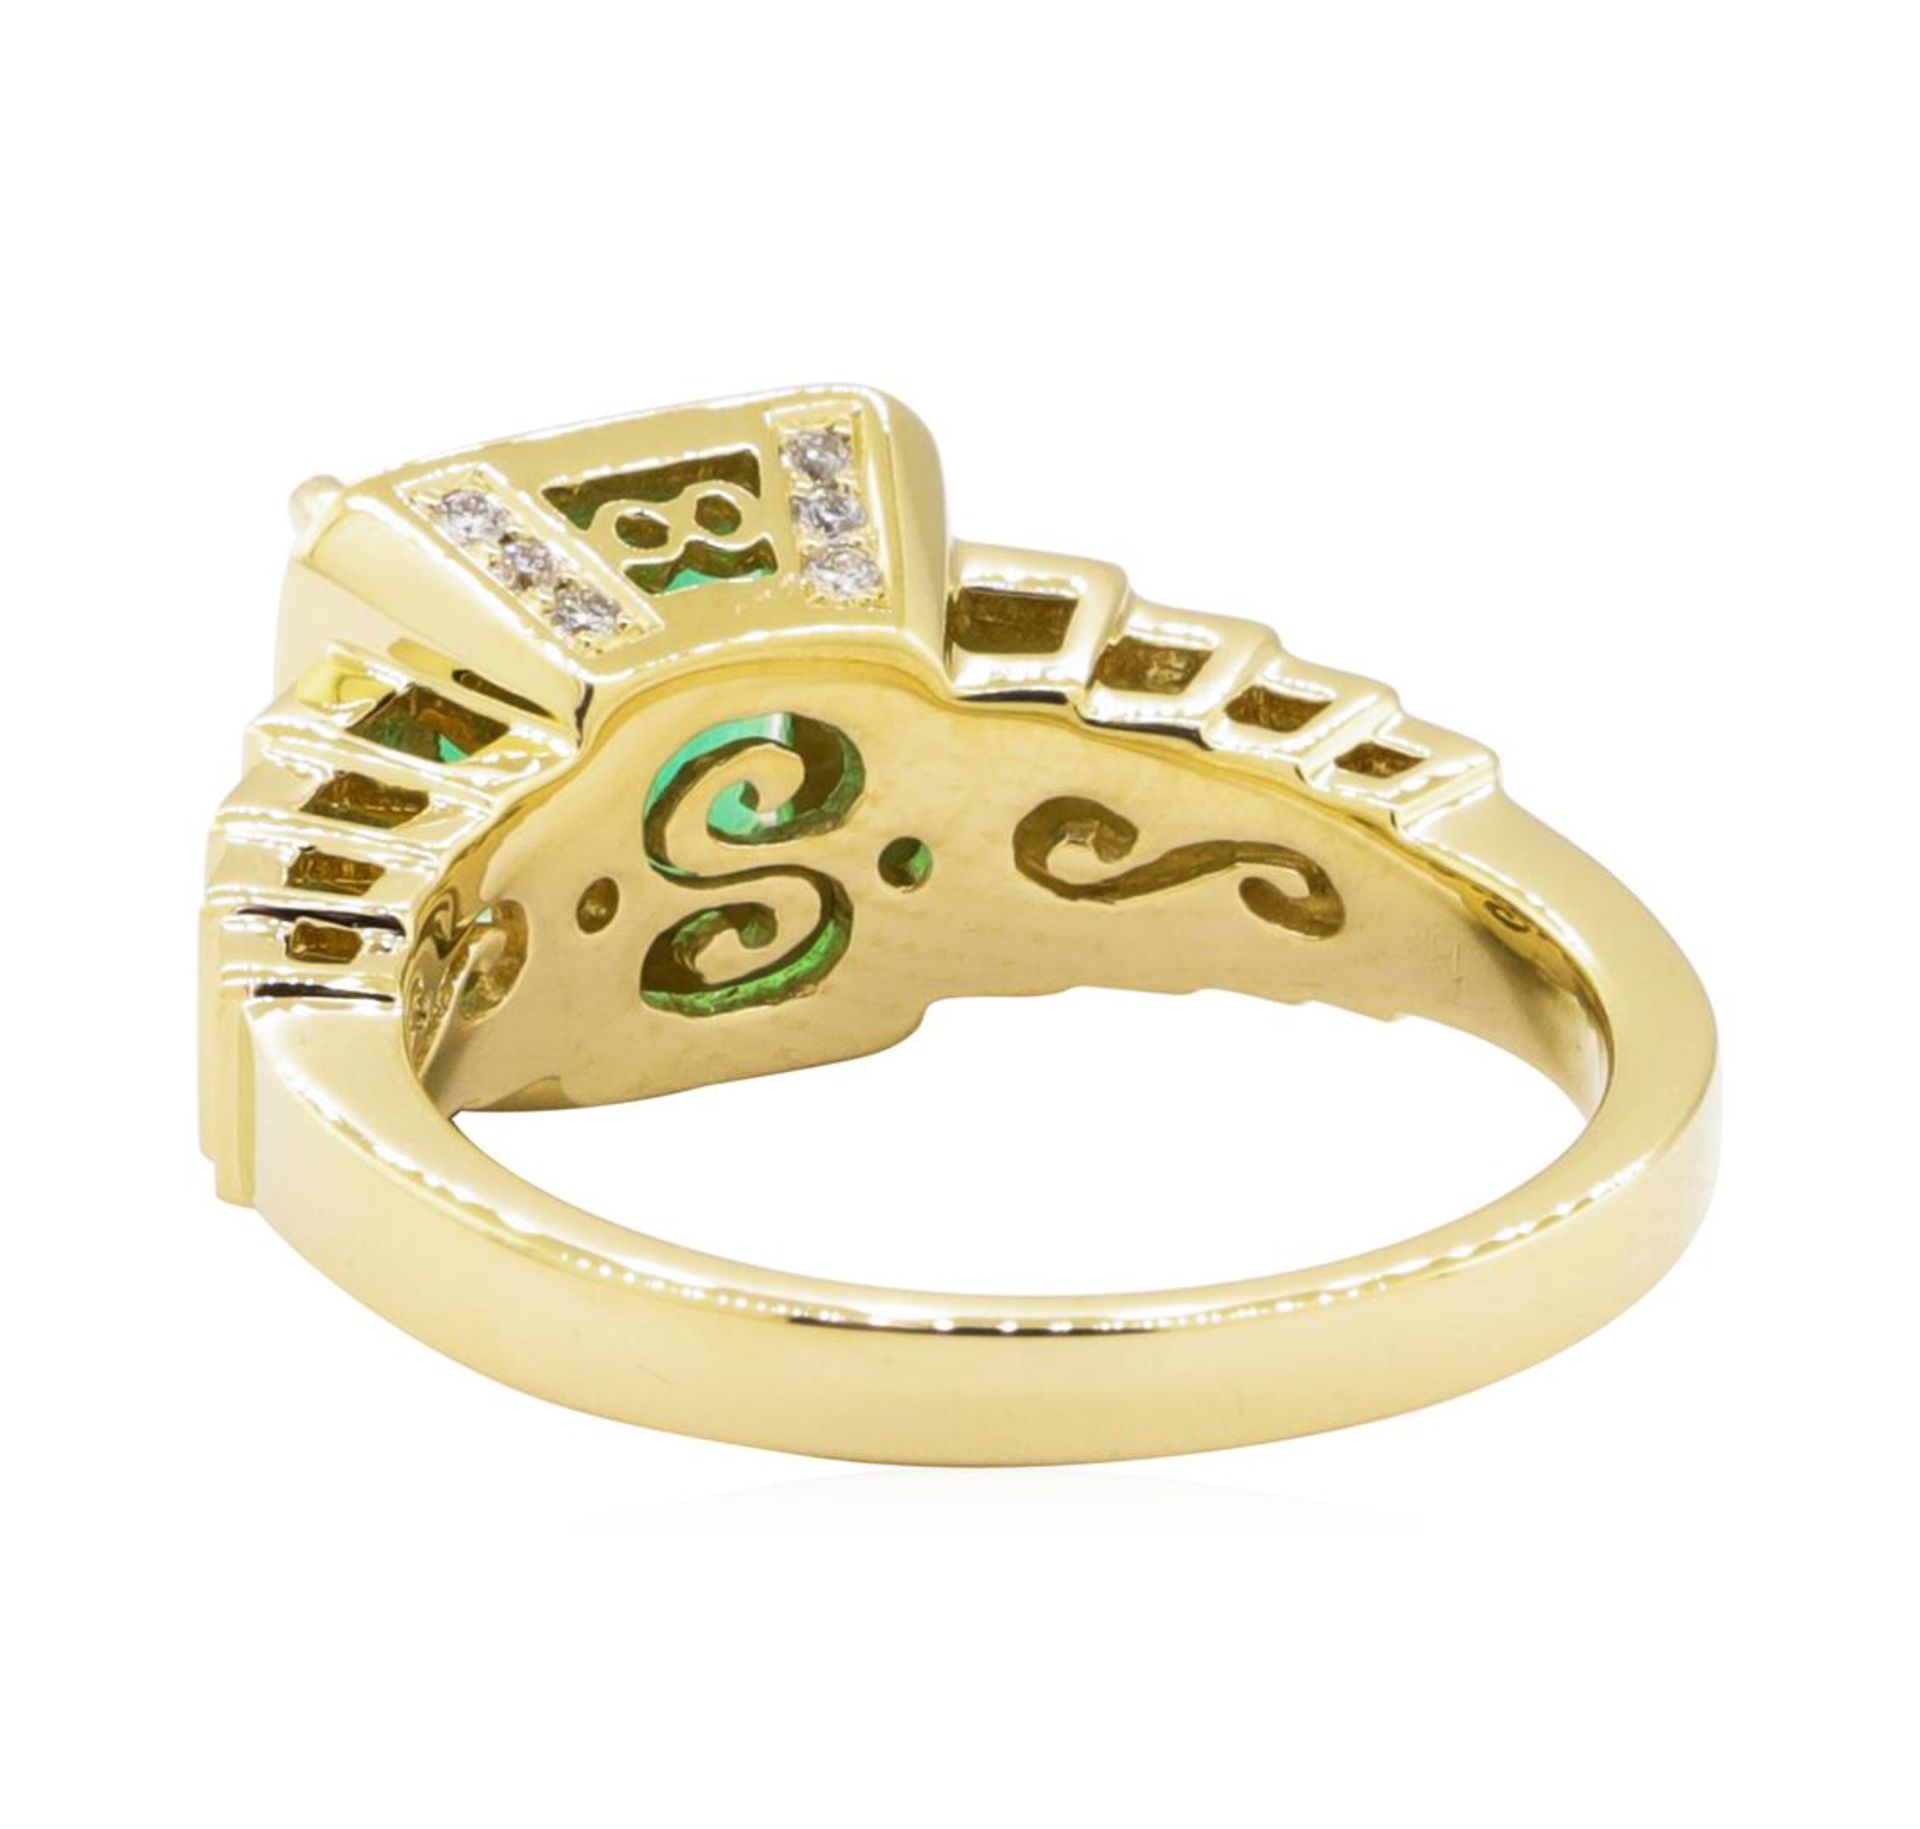 2.56 ctw Emerald and Diamond Ring - 18KT Yellow Gold - Image 3 of 5